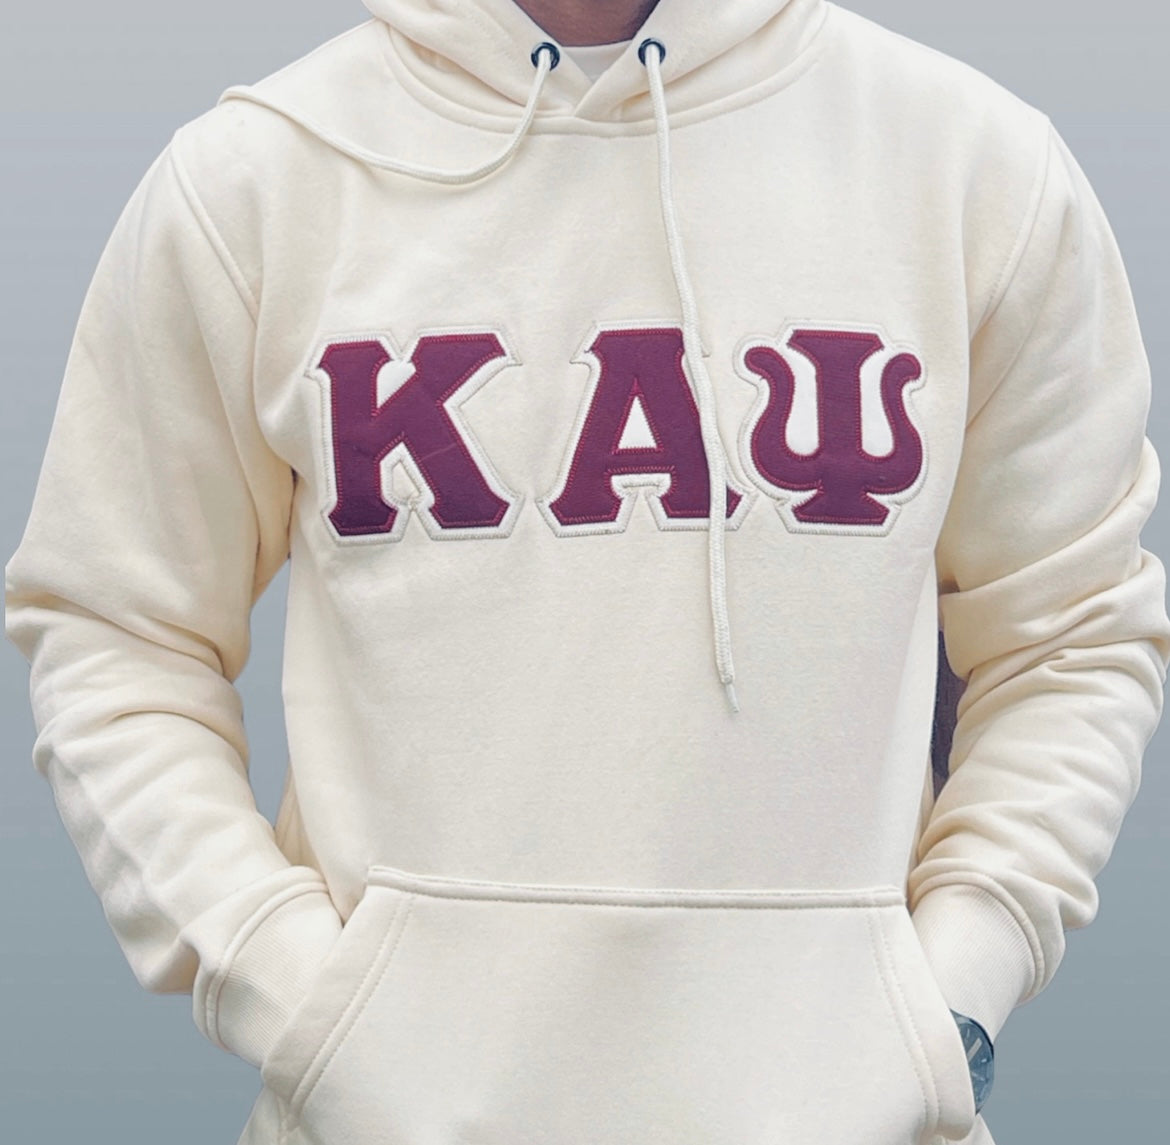 Kappa Alpha Psi Premium Double Stitched Appliqué Embroidery Lettered Hoodie. This is the perfect long-sleeved hoodie to wear while showing off your Kappa Alpha Psi fraternity lettering. A comfortable 100% cotton tee with a twill Greek letters embroidery across the chest give you the perfect fit. This hoodie is also a perfect gift or your favorite Kappa Man.